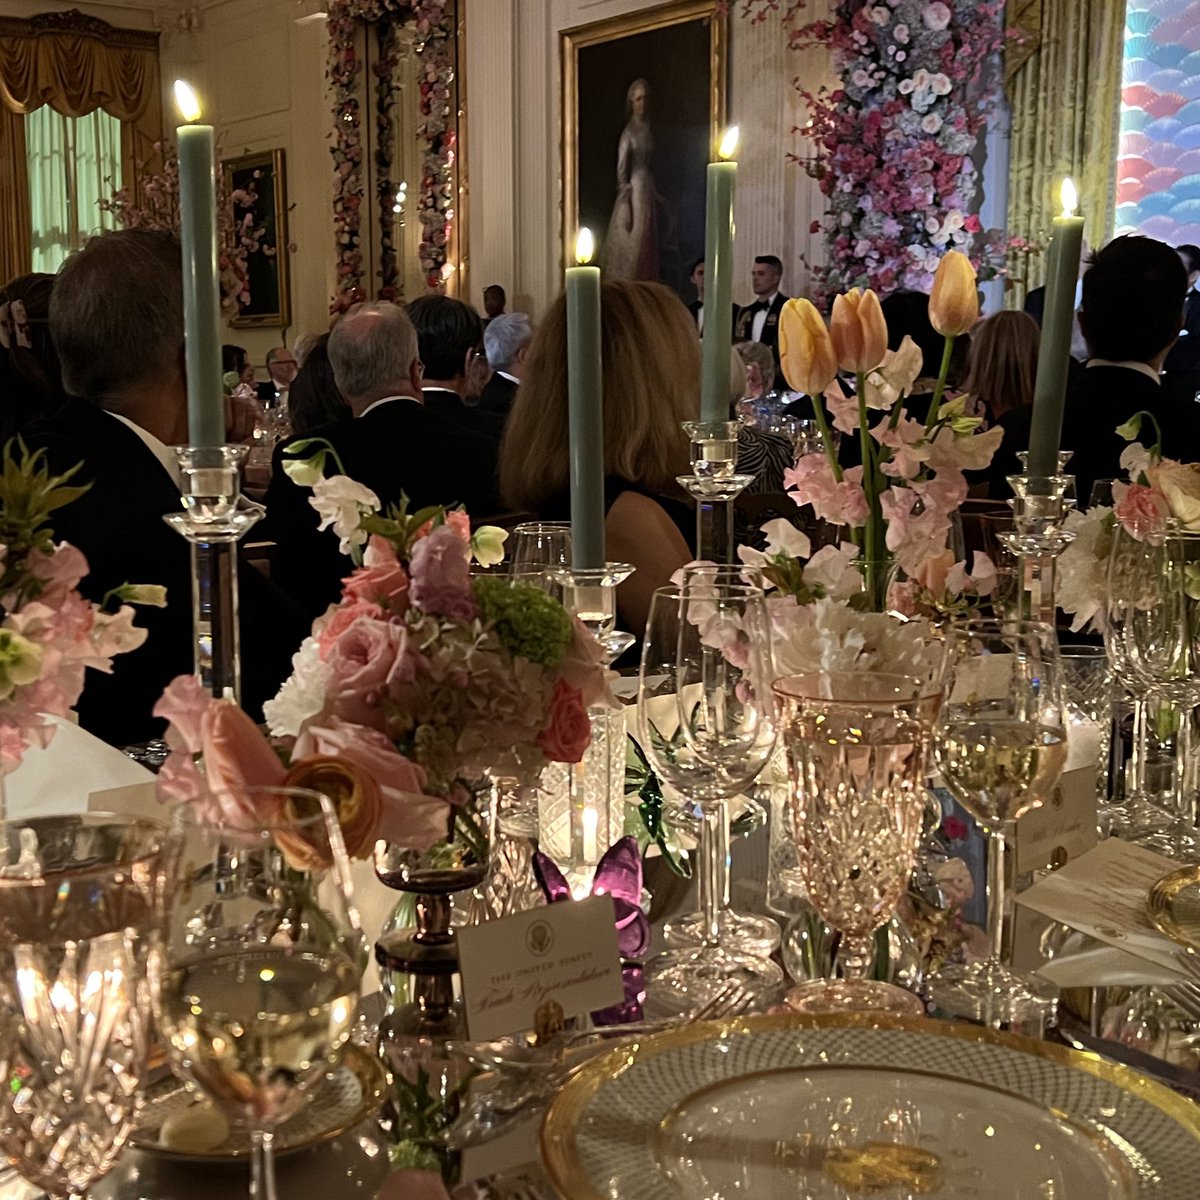 Honored to attend last night’s state dinner for Prime Minister Fumio Kishida of Japan.   Our continued alliance with Japan underscores years of diplomacy & partnership. And as co-chair of the Congressional Study Group on Japan, I'm committed to deepening our strong relationship.